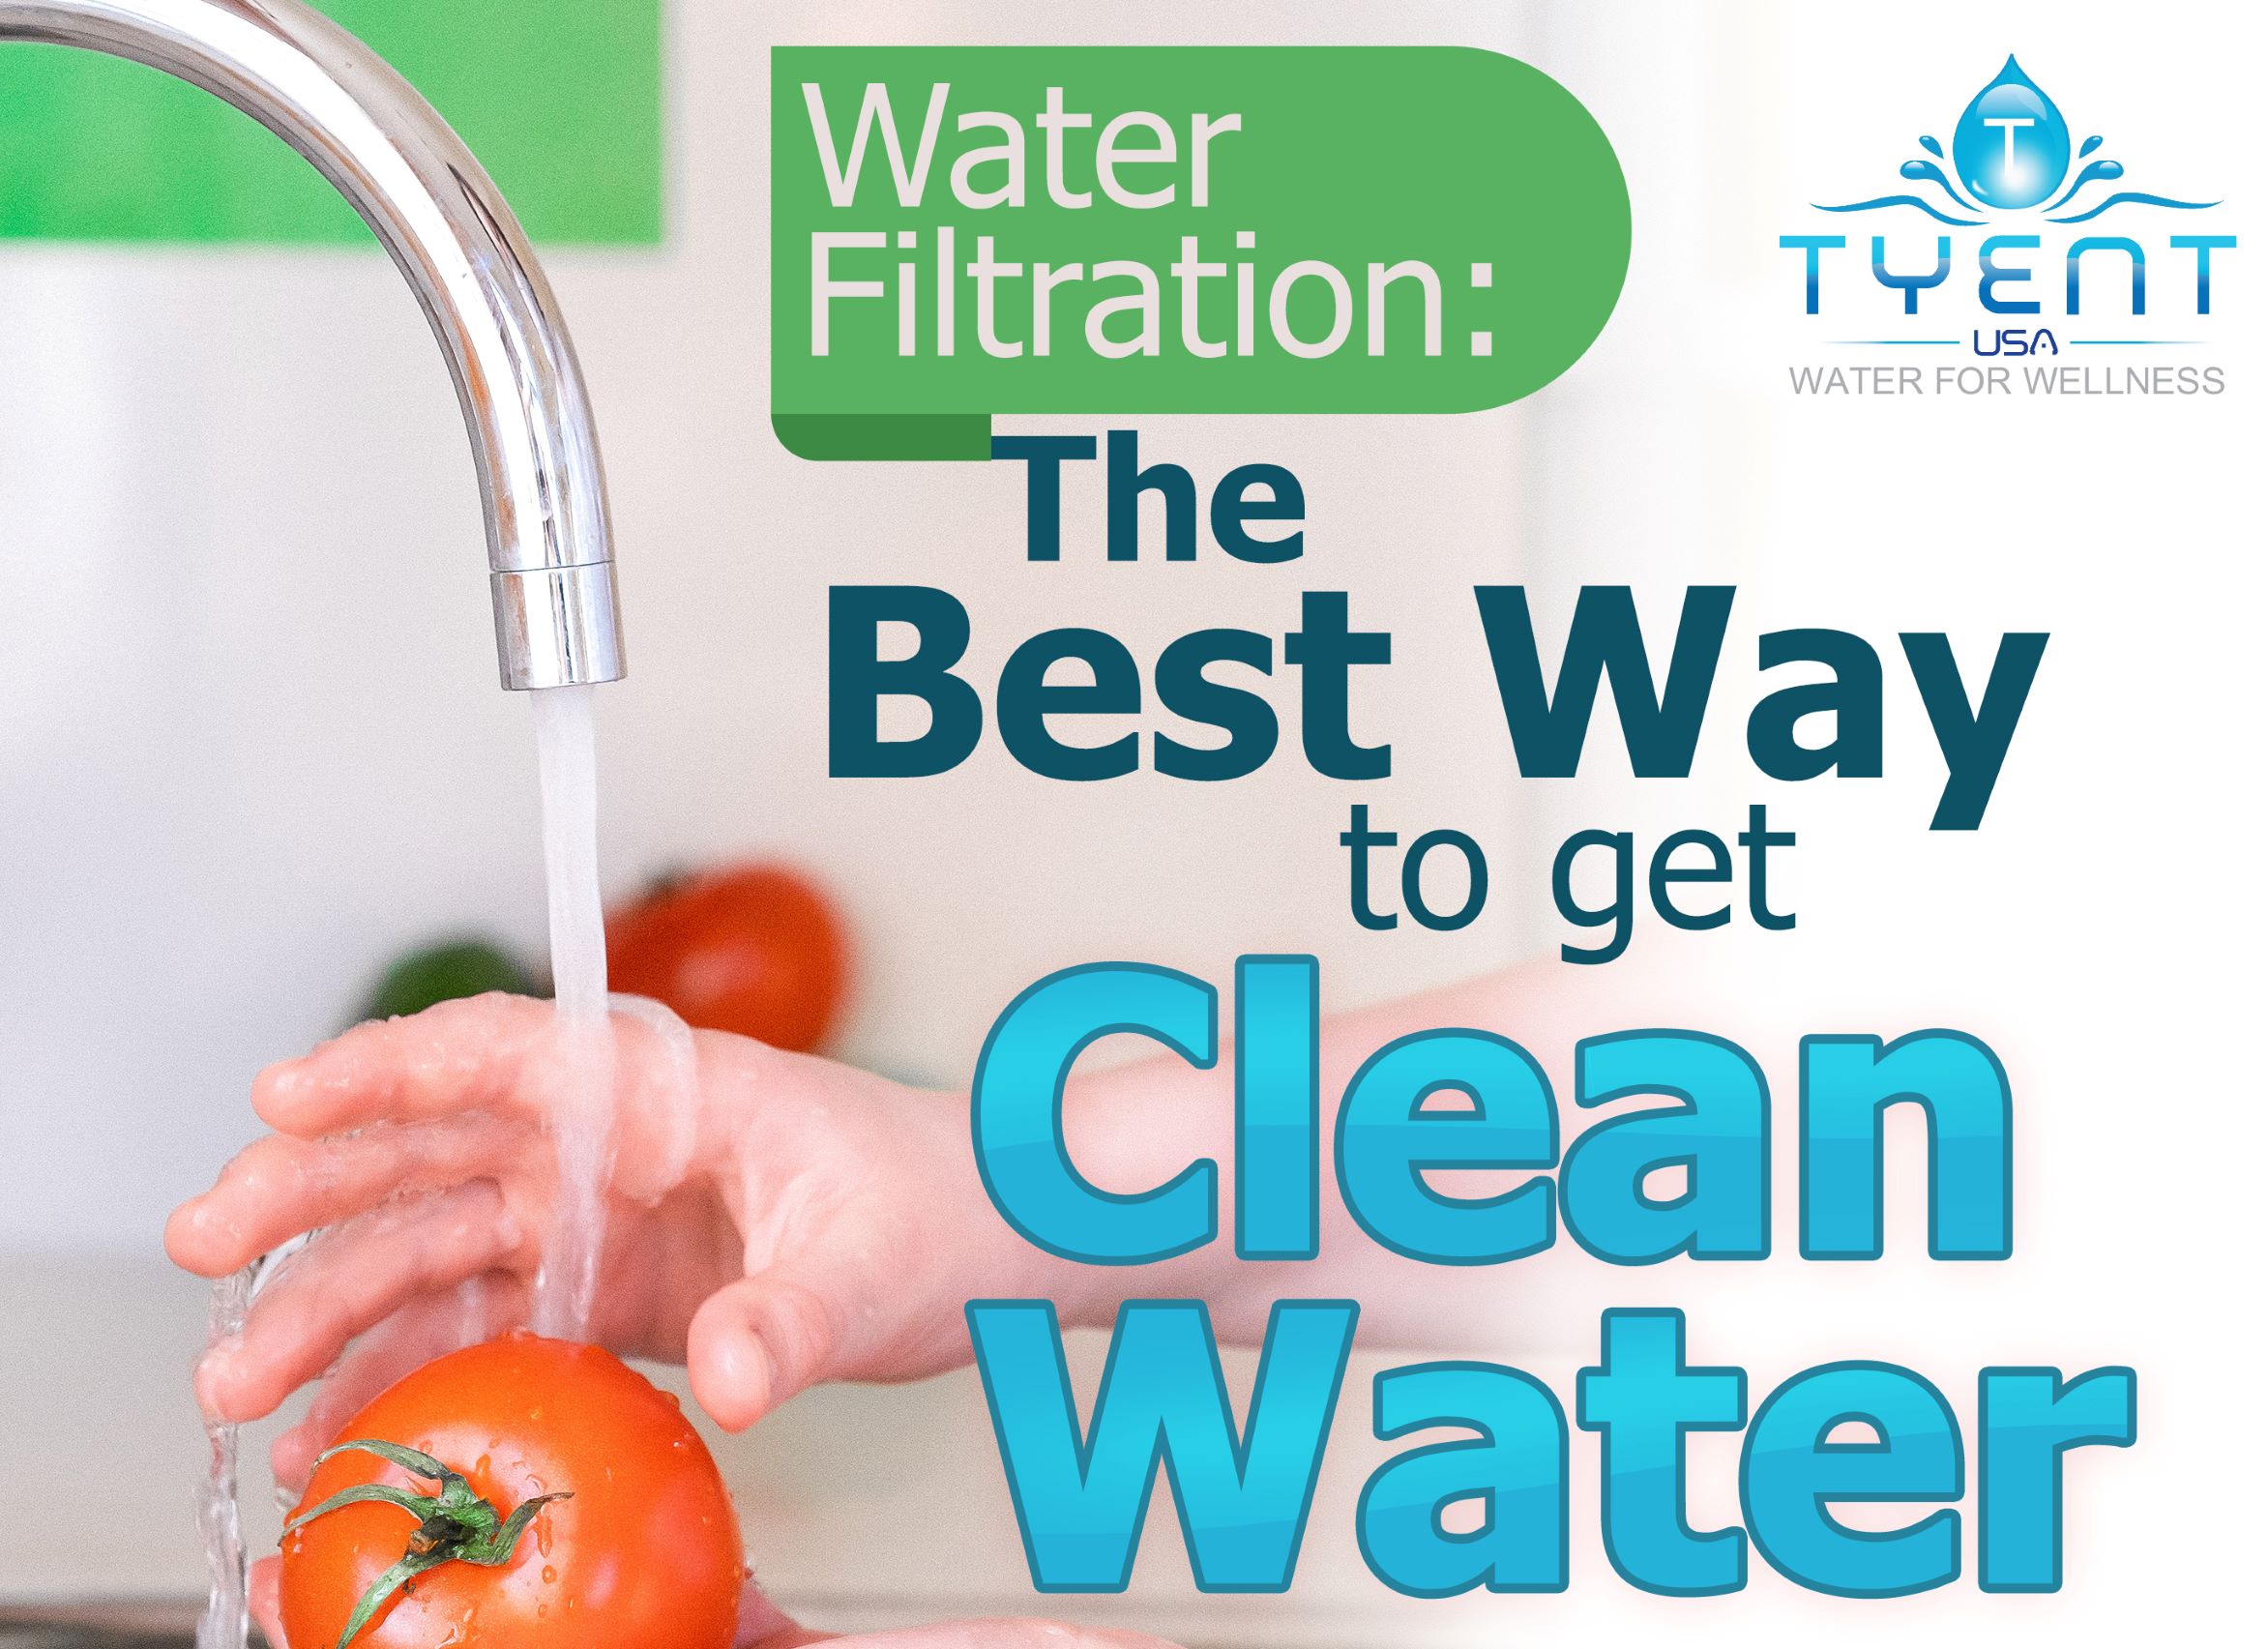 Water Filtration: The Best Way to Get Clean Water